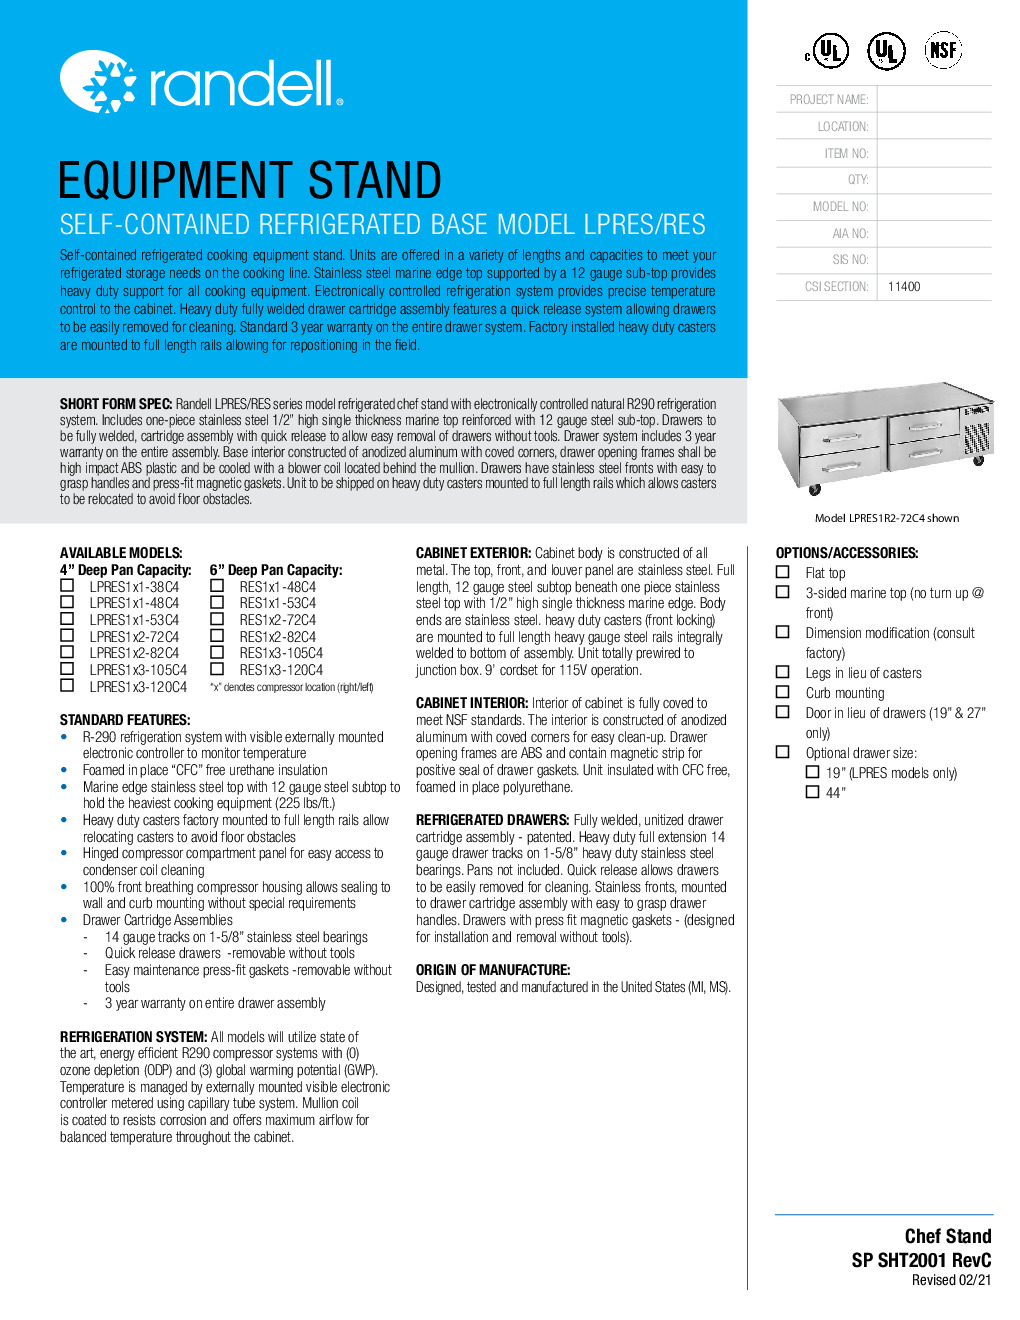 Randell RES1L3-120C4 Refrigerated Base Equipment Stand